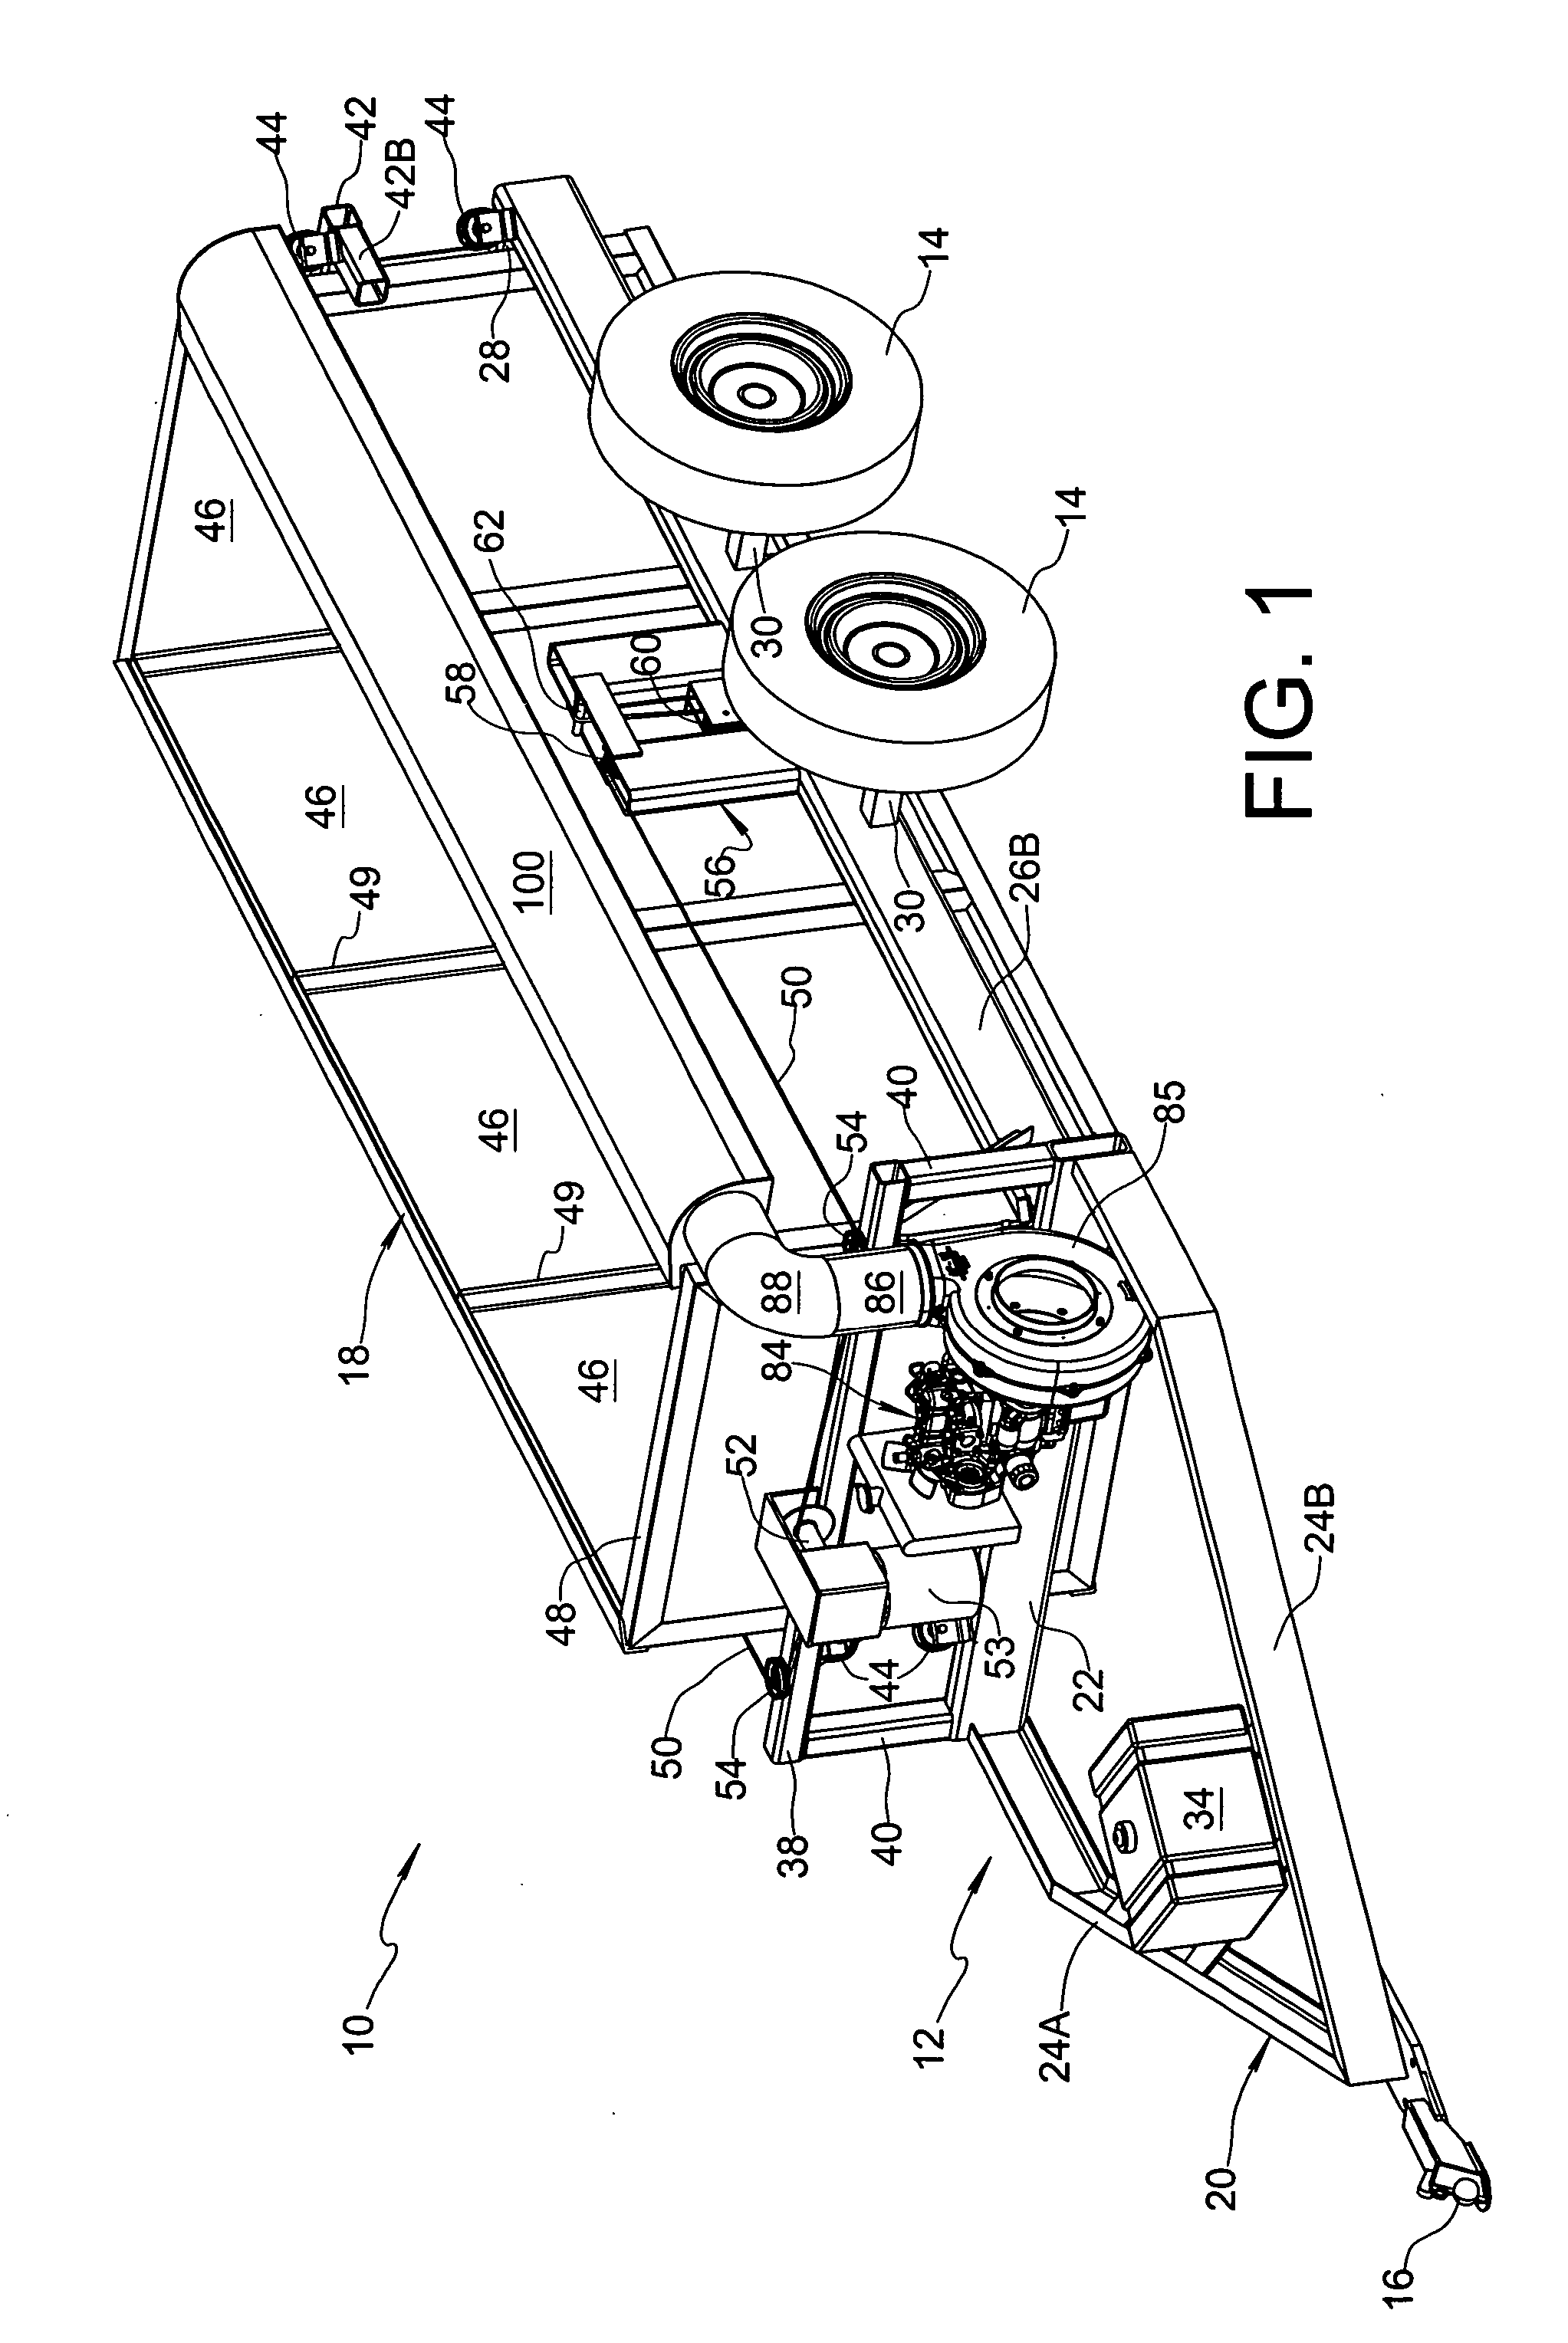 Transportable incineration apparatus and method